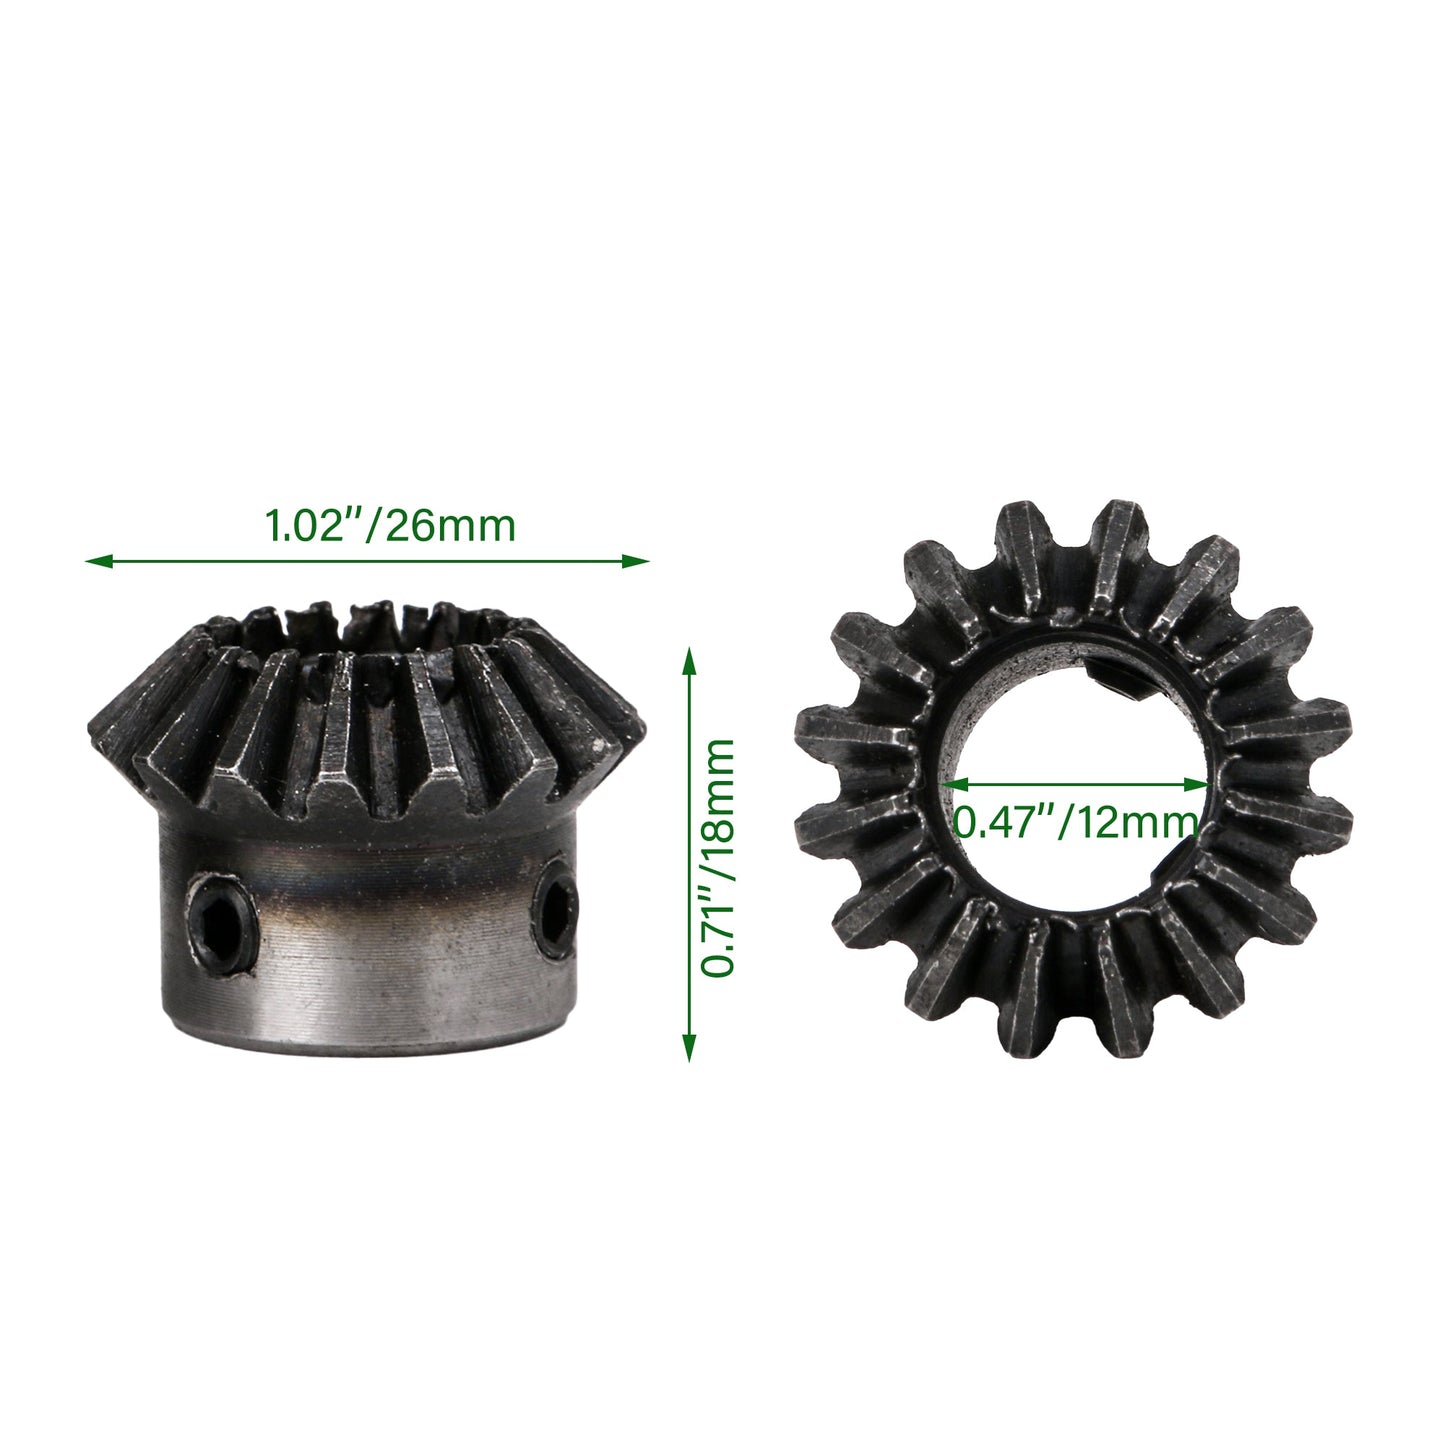 BQLZR Metal Bevel Driver Gear Wheel 1.5 Modulus 16T 0.47inch Hole Dia for DIY Pack of 10